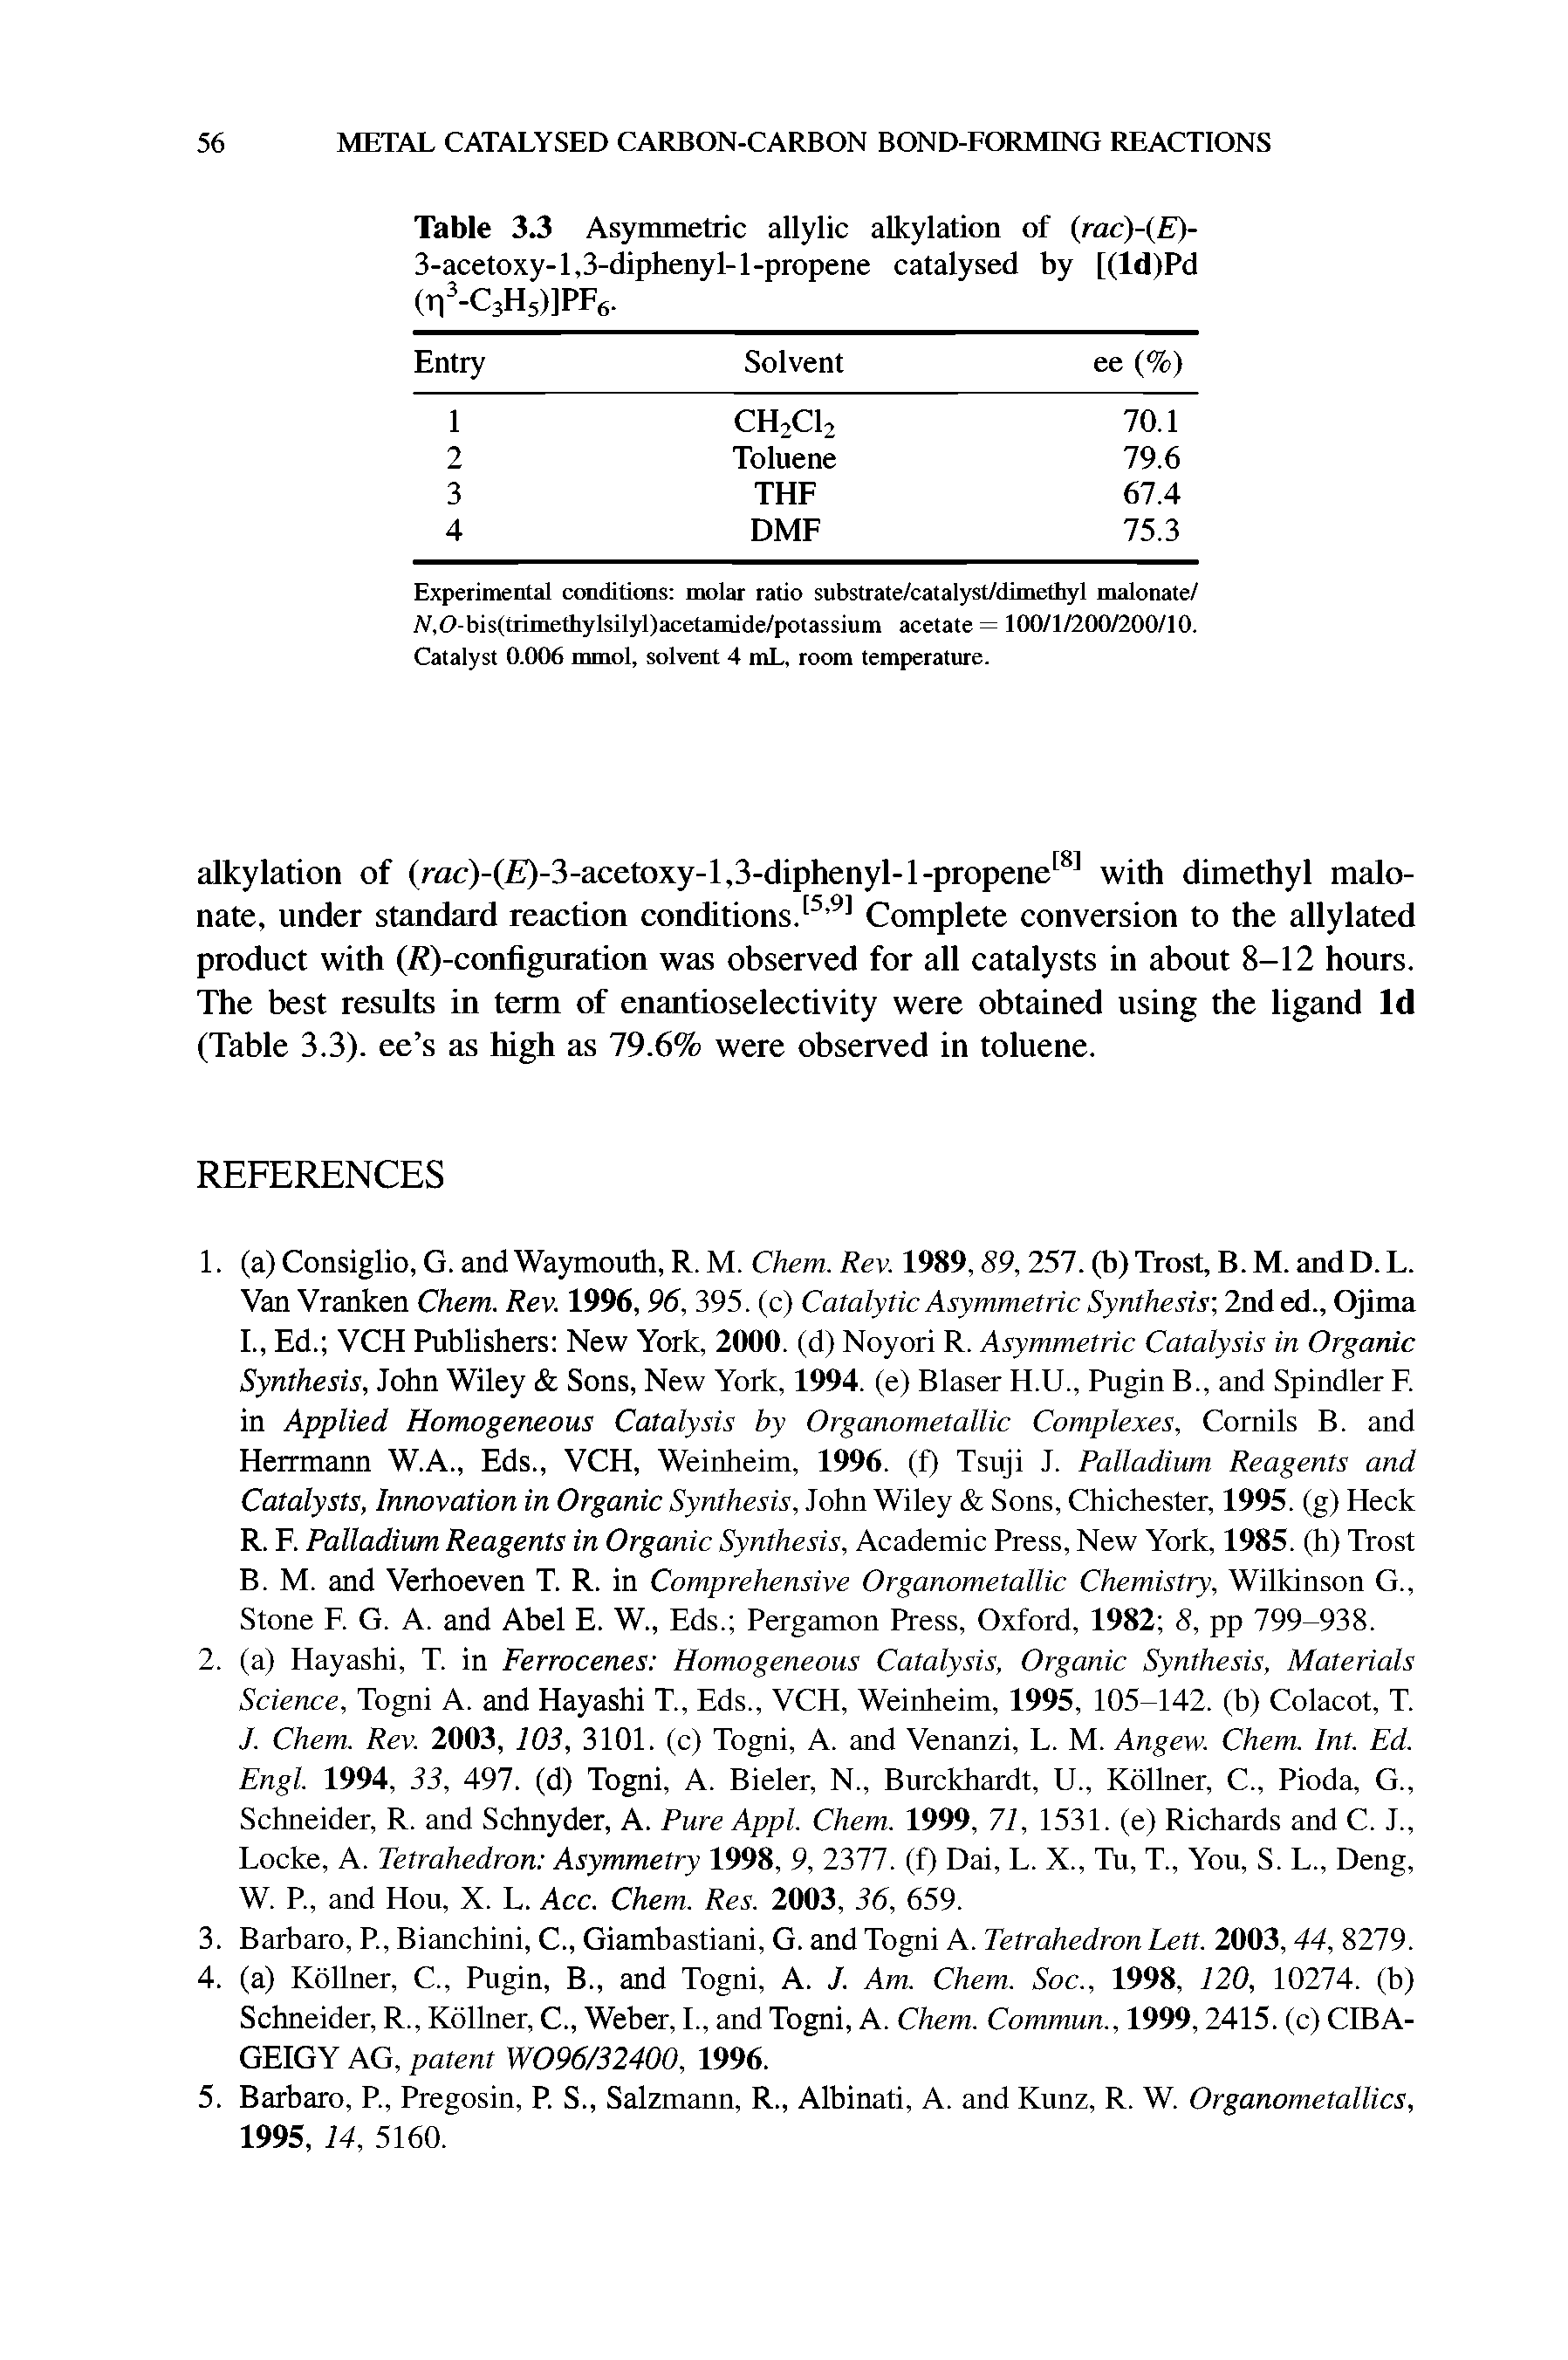 Table 3.3 Asymmetric allylic alkylation of (rac)-(E)-3-acetoxy-l,3-diphenyl-l-propene catalysed by [(ld)Pd (n3-C3H5)]PF6.